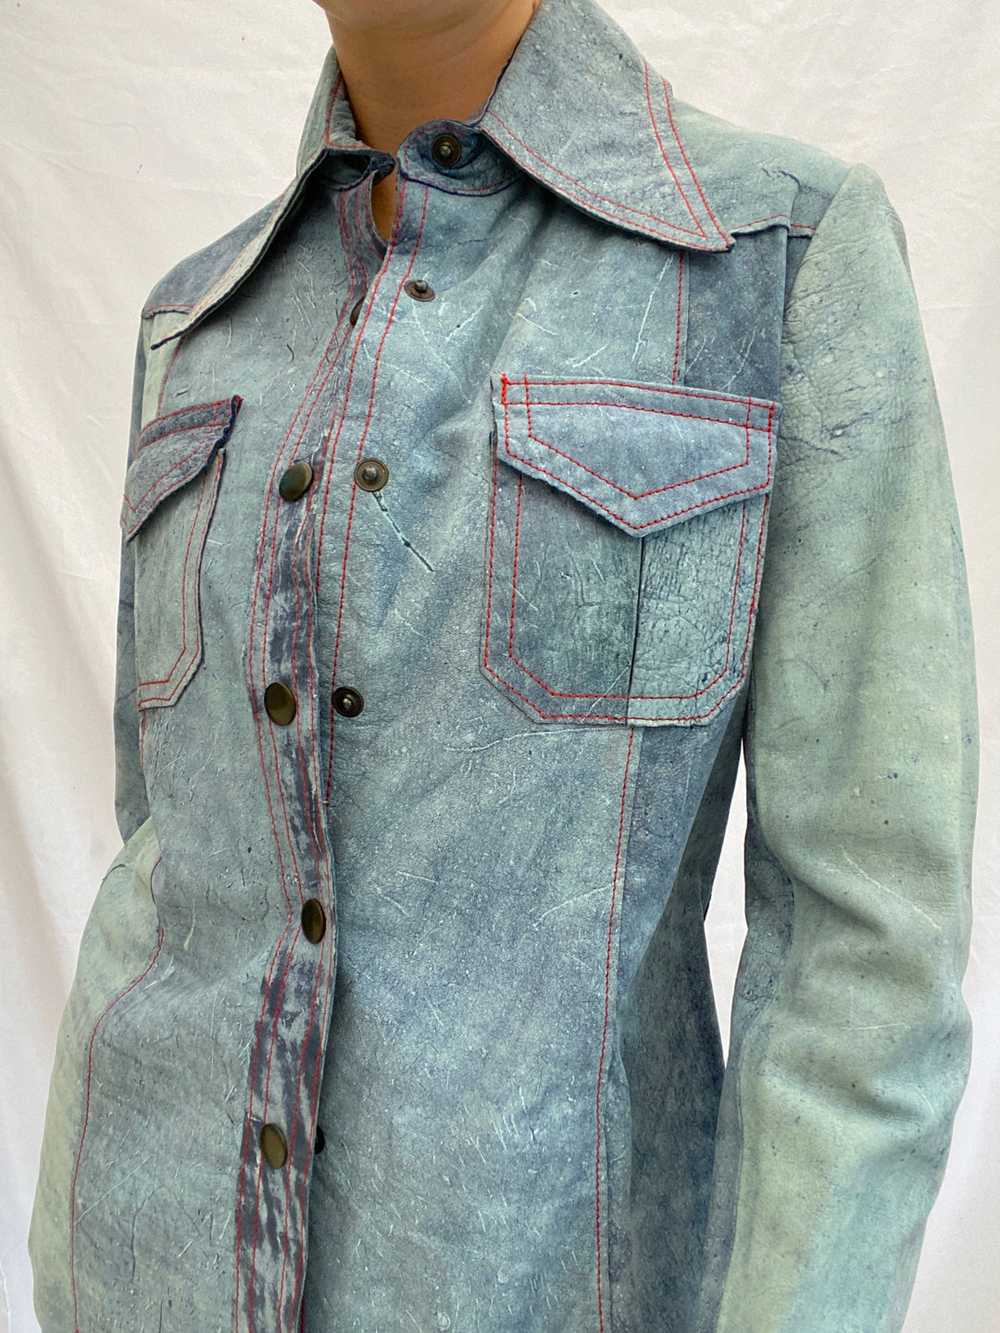 Baby Blue Suede Jacket Shirt with Red Stitching - image 4